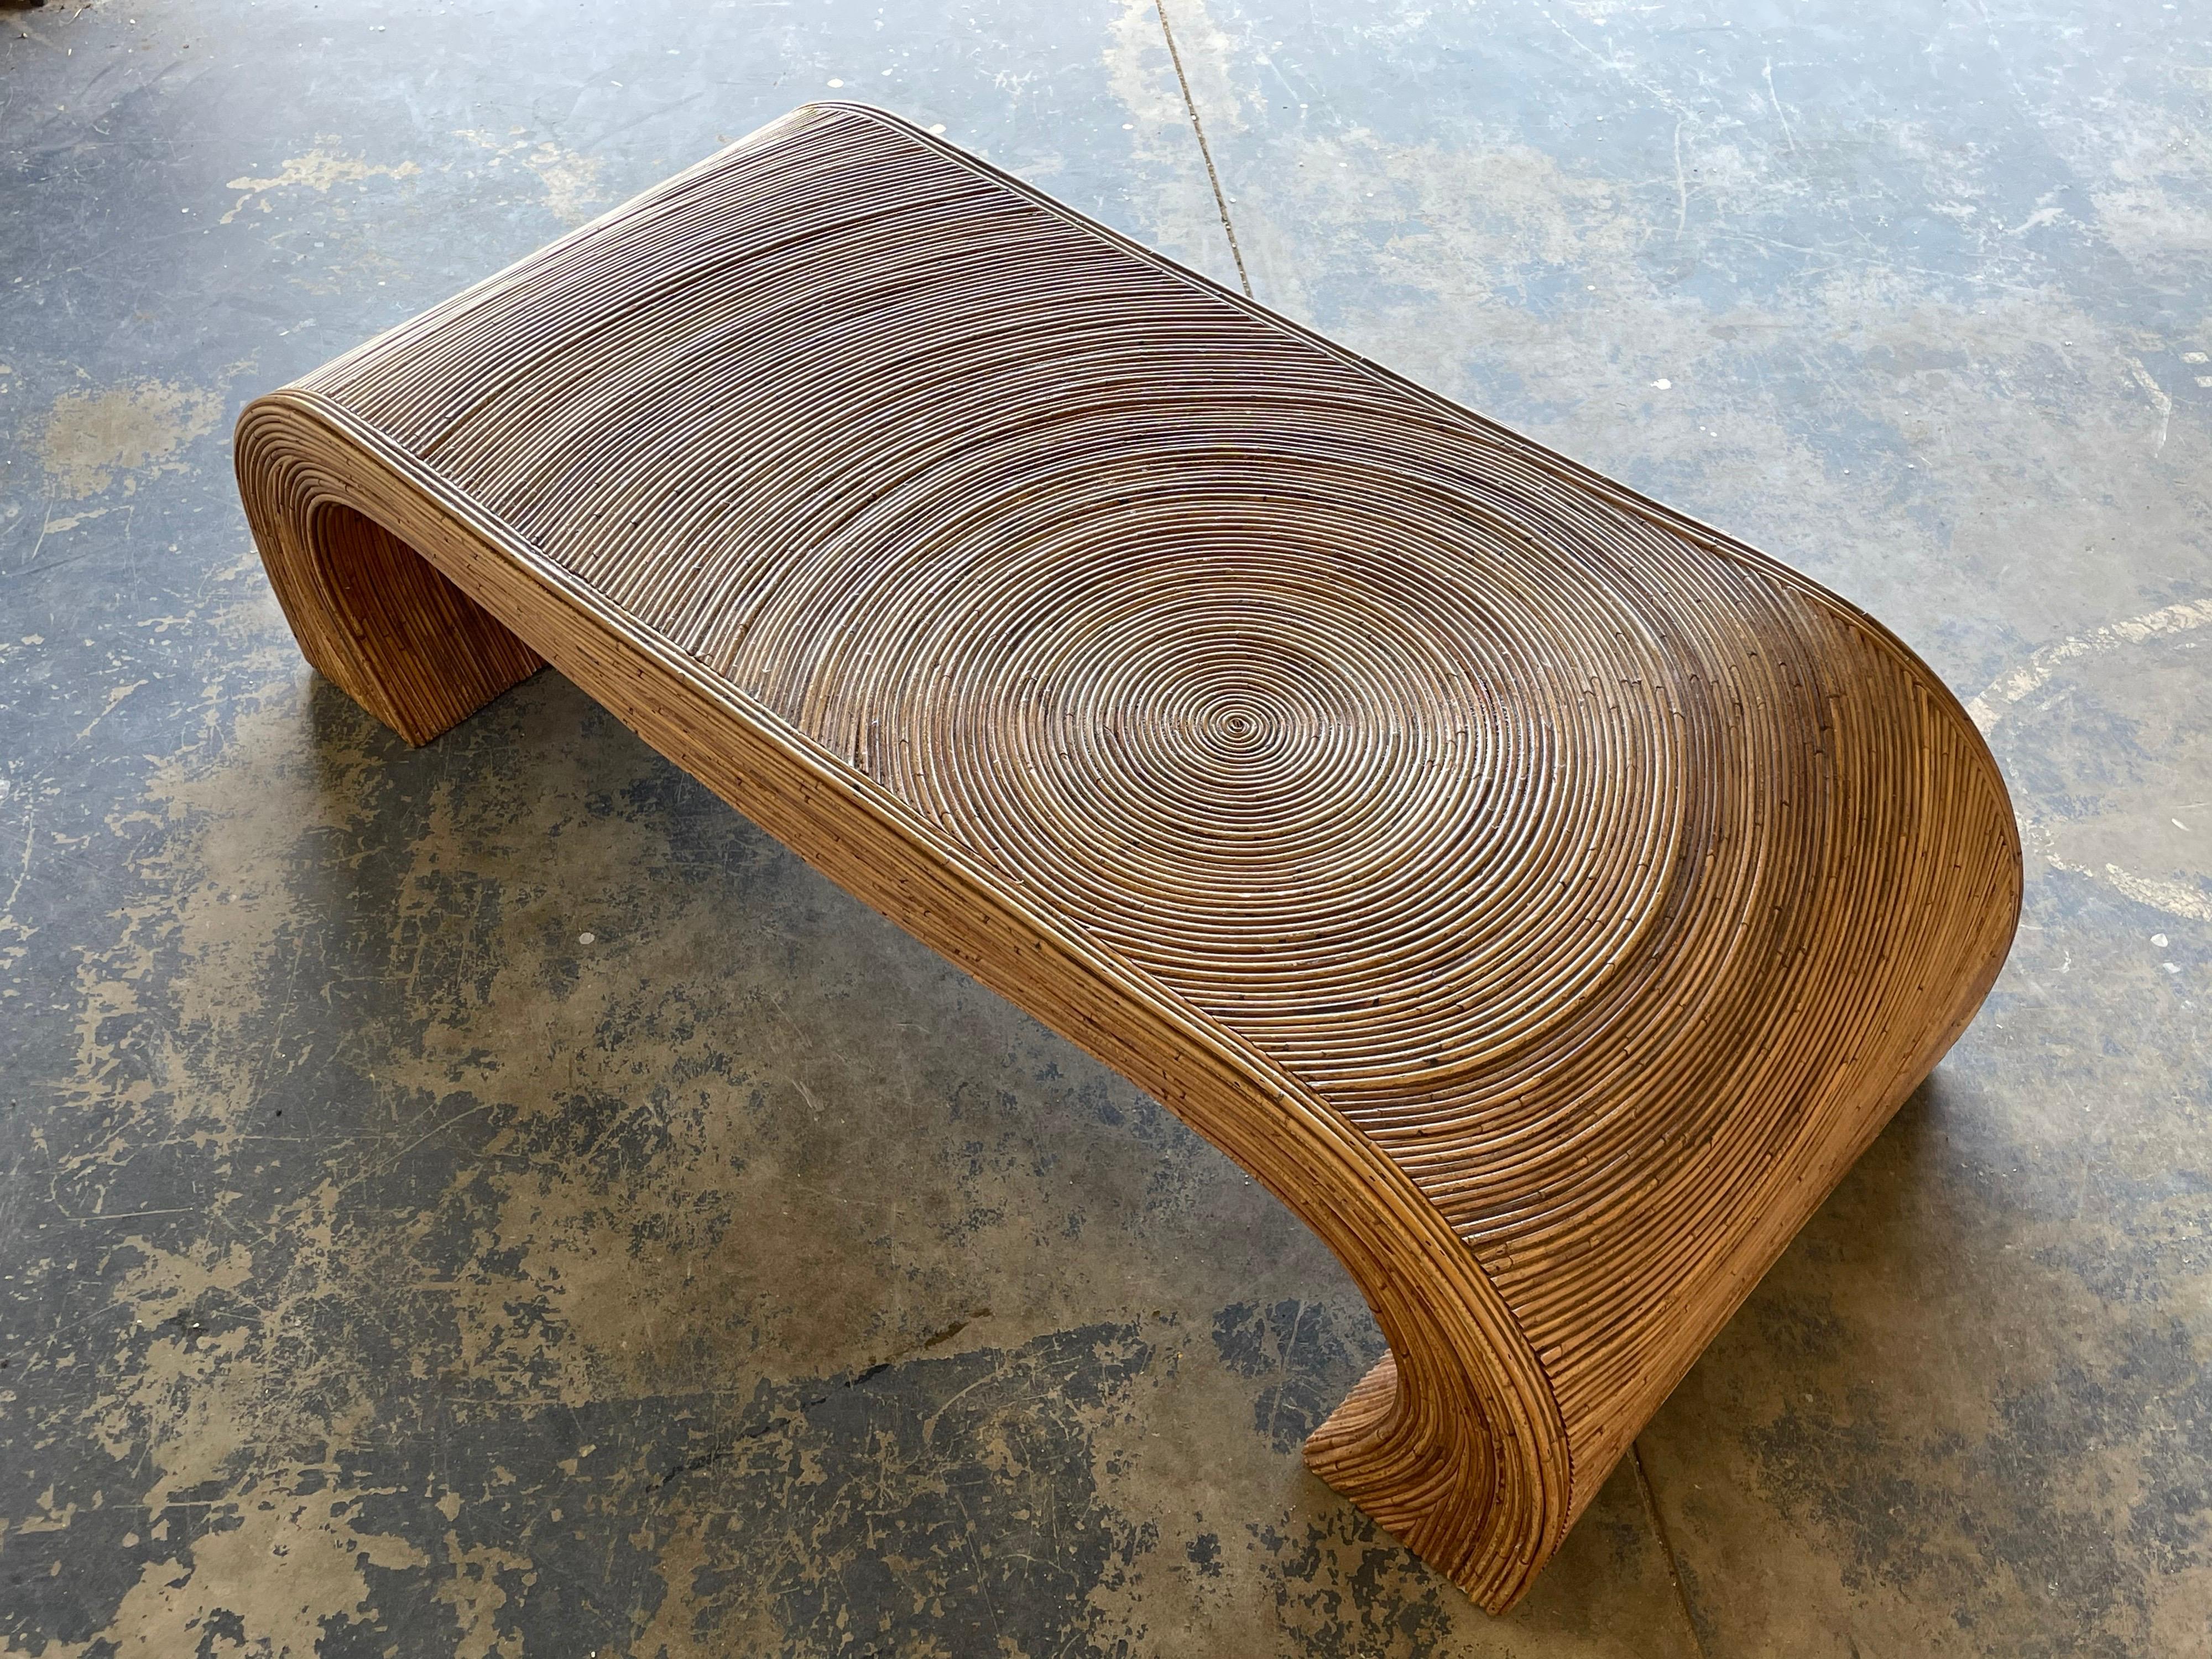 No description provided iconic split reed coffee table. Wonderful form and use of materials.

Blends well with other organic modernism designs such as Paul Laszlo, Paul Frankl, Vladimir Kagan, and T.H. Robsjohn-Gibbings.